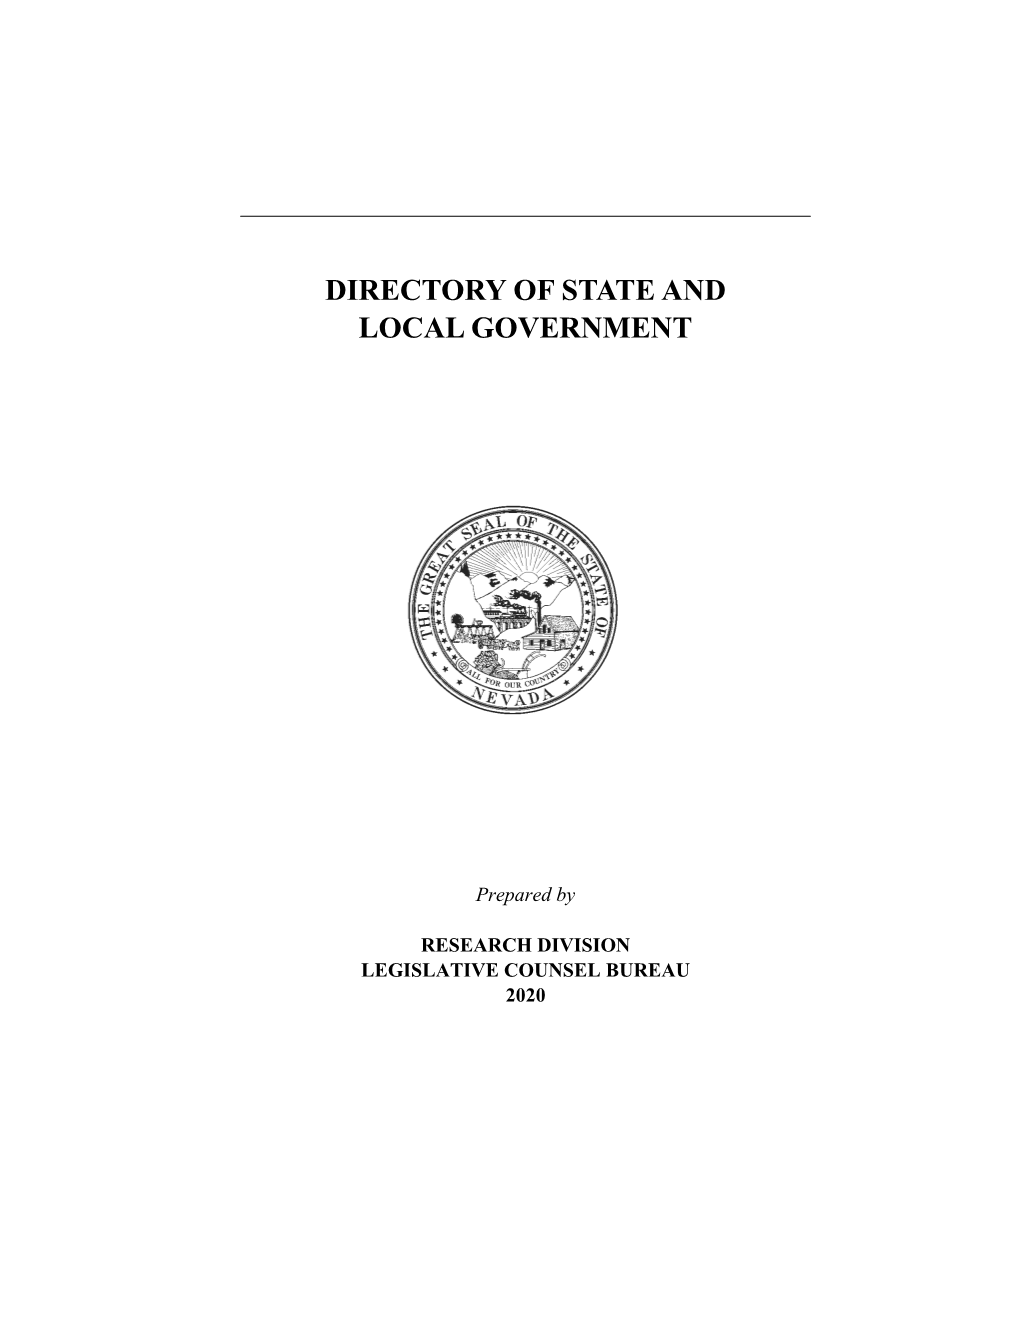 Directory of State and Local Government